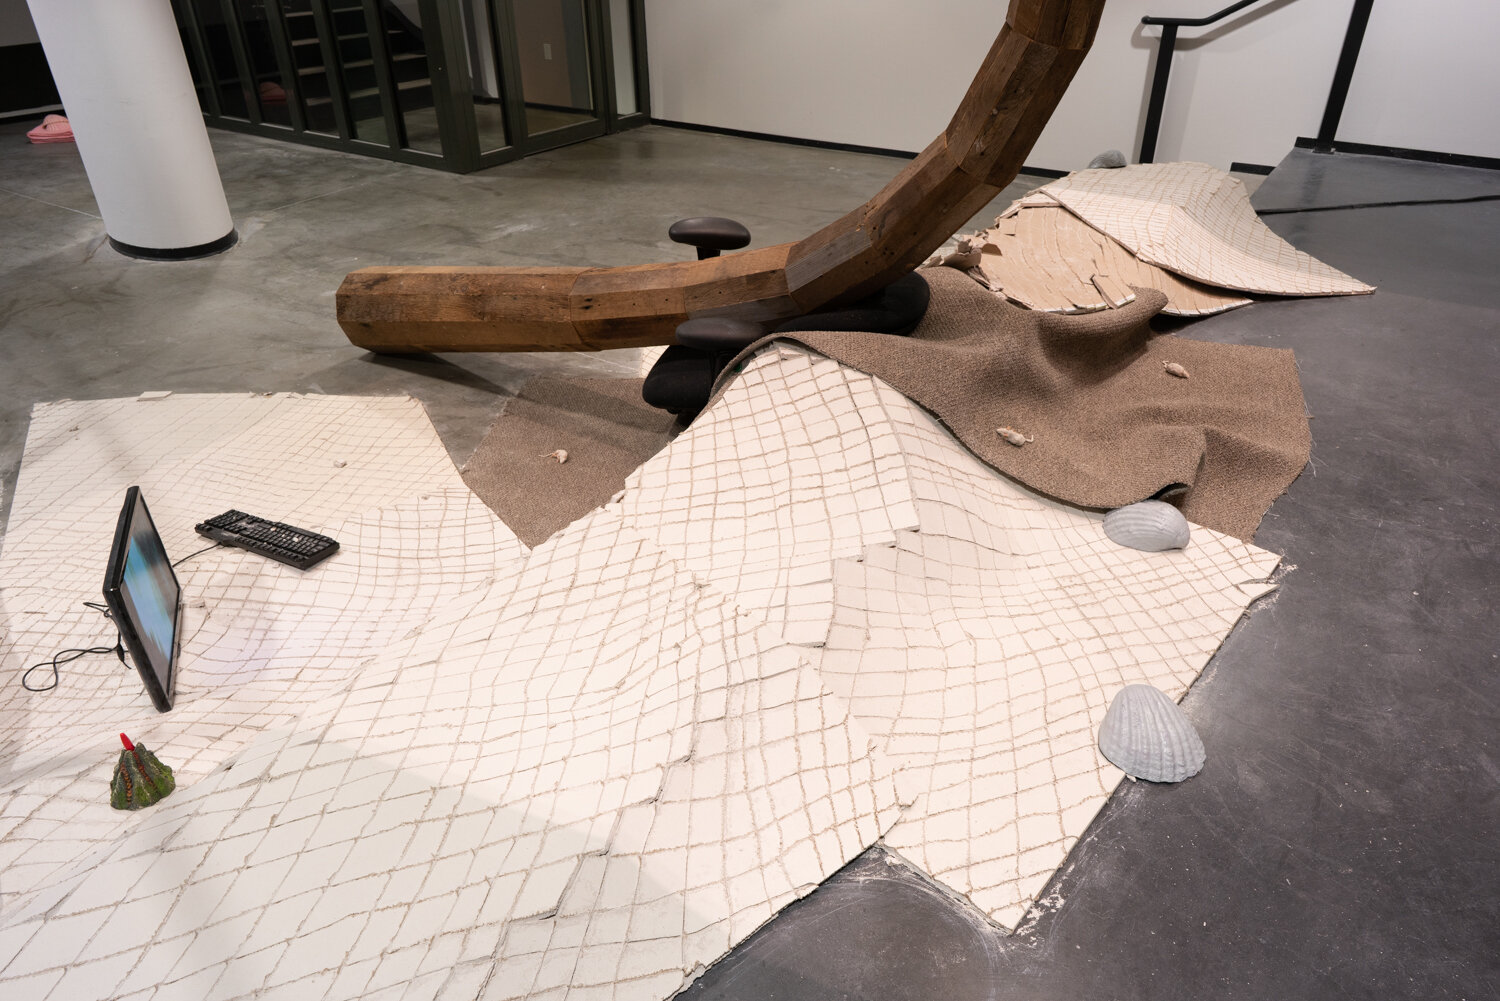  Alex Zak  Swamped , 2019 (detail) Sheet rock, plaster wrap, carpet, wood, steel, aluminum, paint, cement, sand, oven-bake clay,   office chair, modified ceiling fan, Monitor, Keyboard, aquarium volcano, red sharpie 192 x 204 x 196 inches (488 x 305 